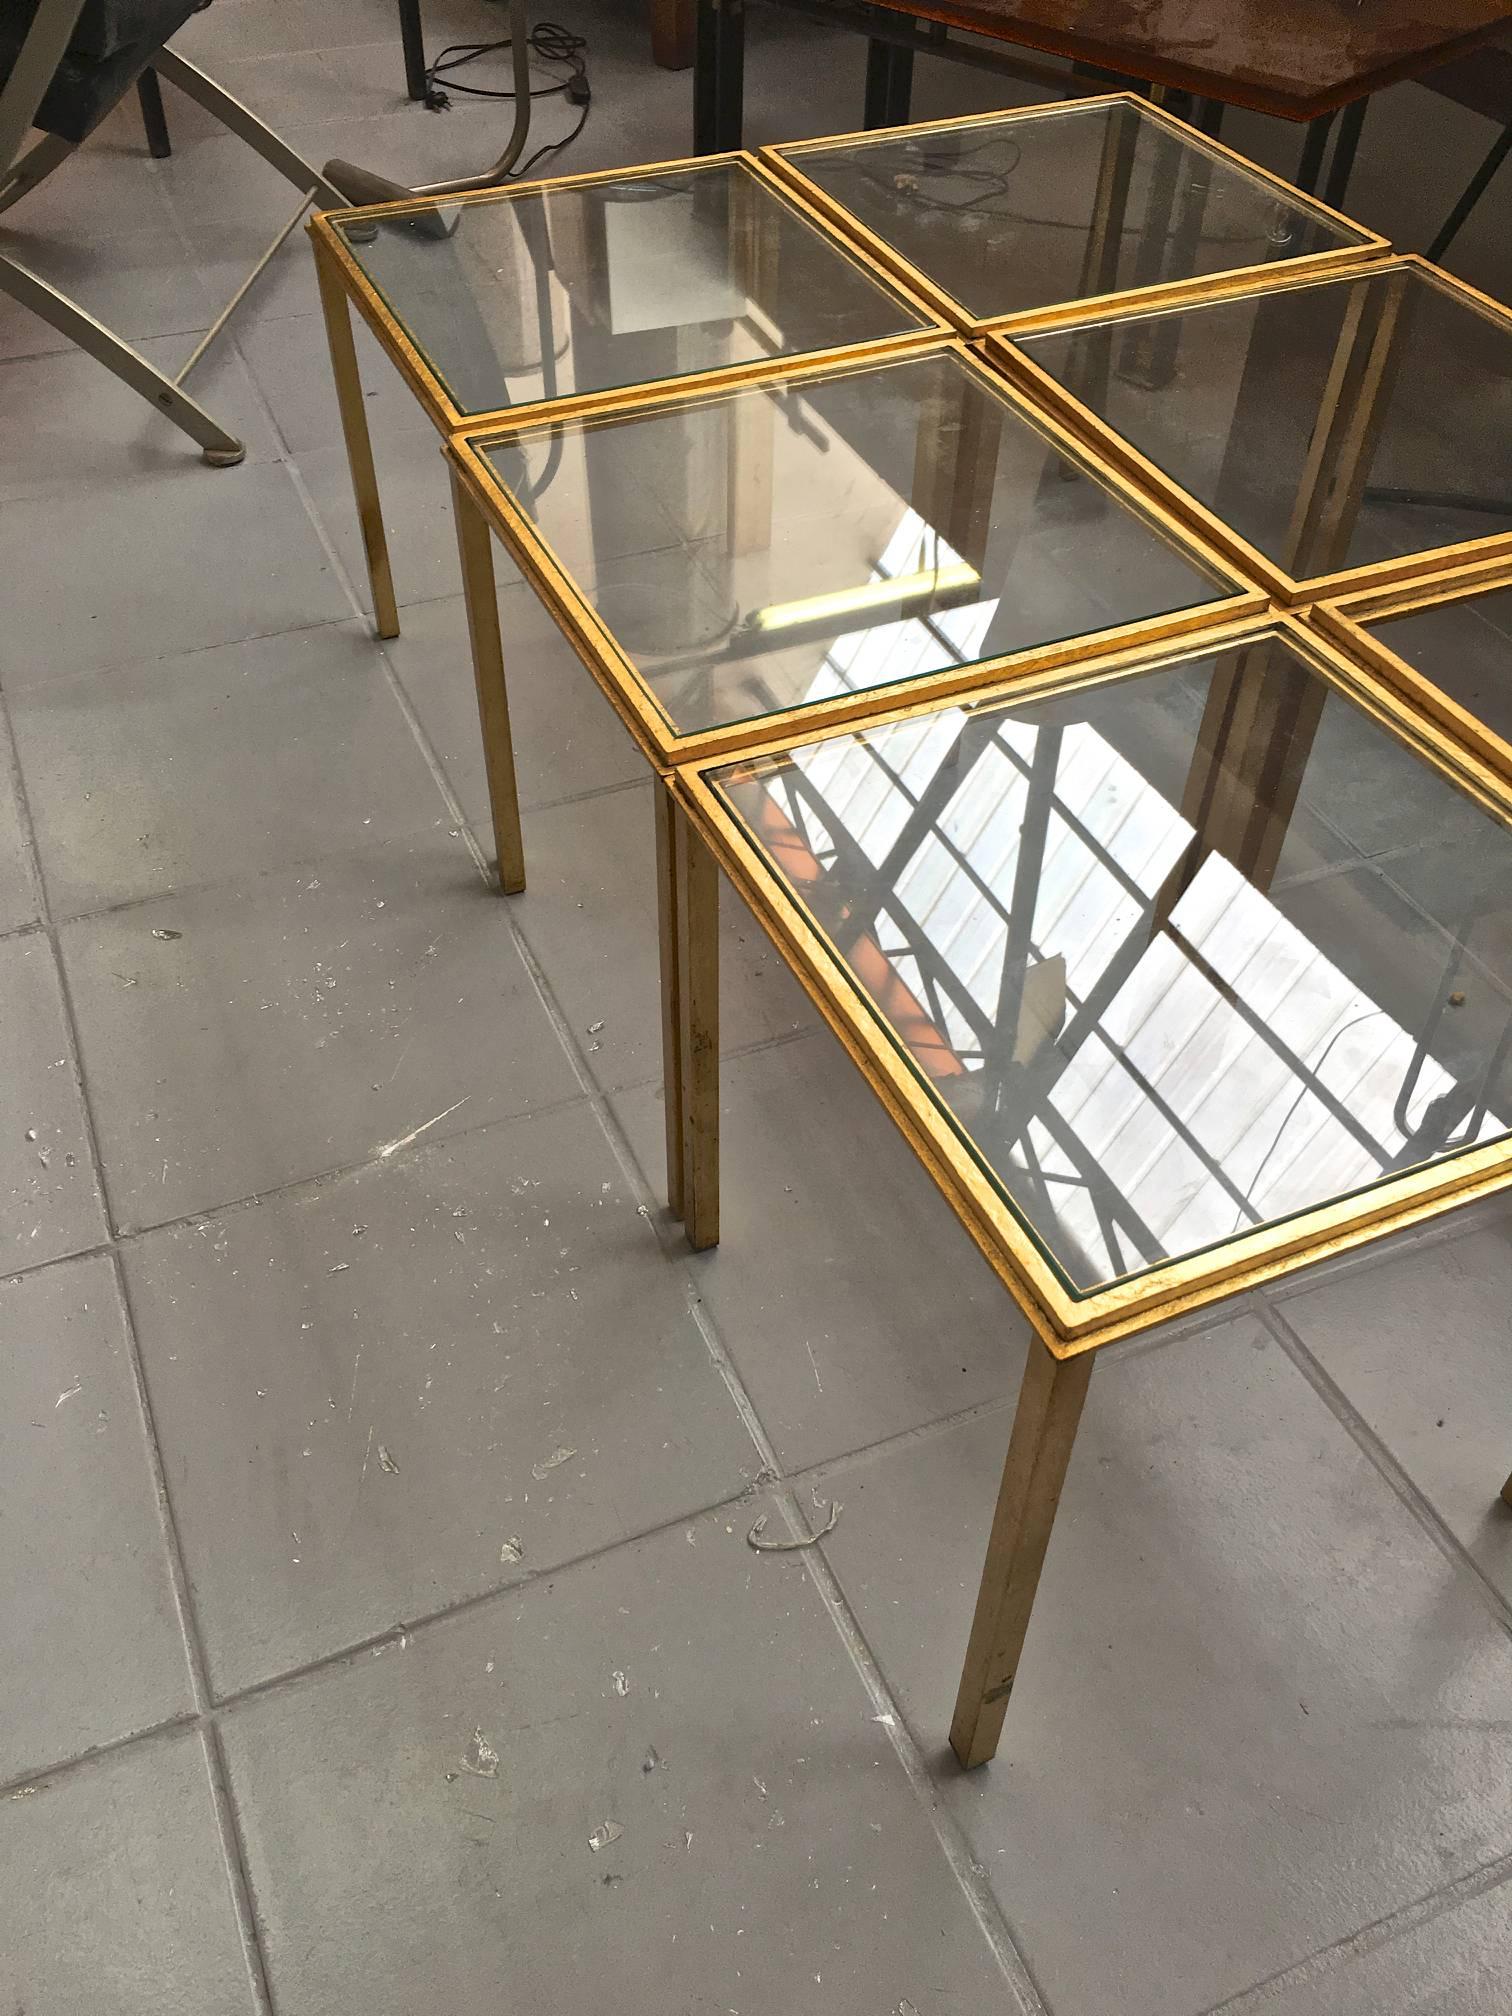 Roger Thibier Spectacular Gold Leaf Wrought Iron Big Coffee Table Made of 6 Unit In Excellent Condition For Sale In Paris, ile de france